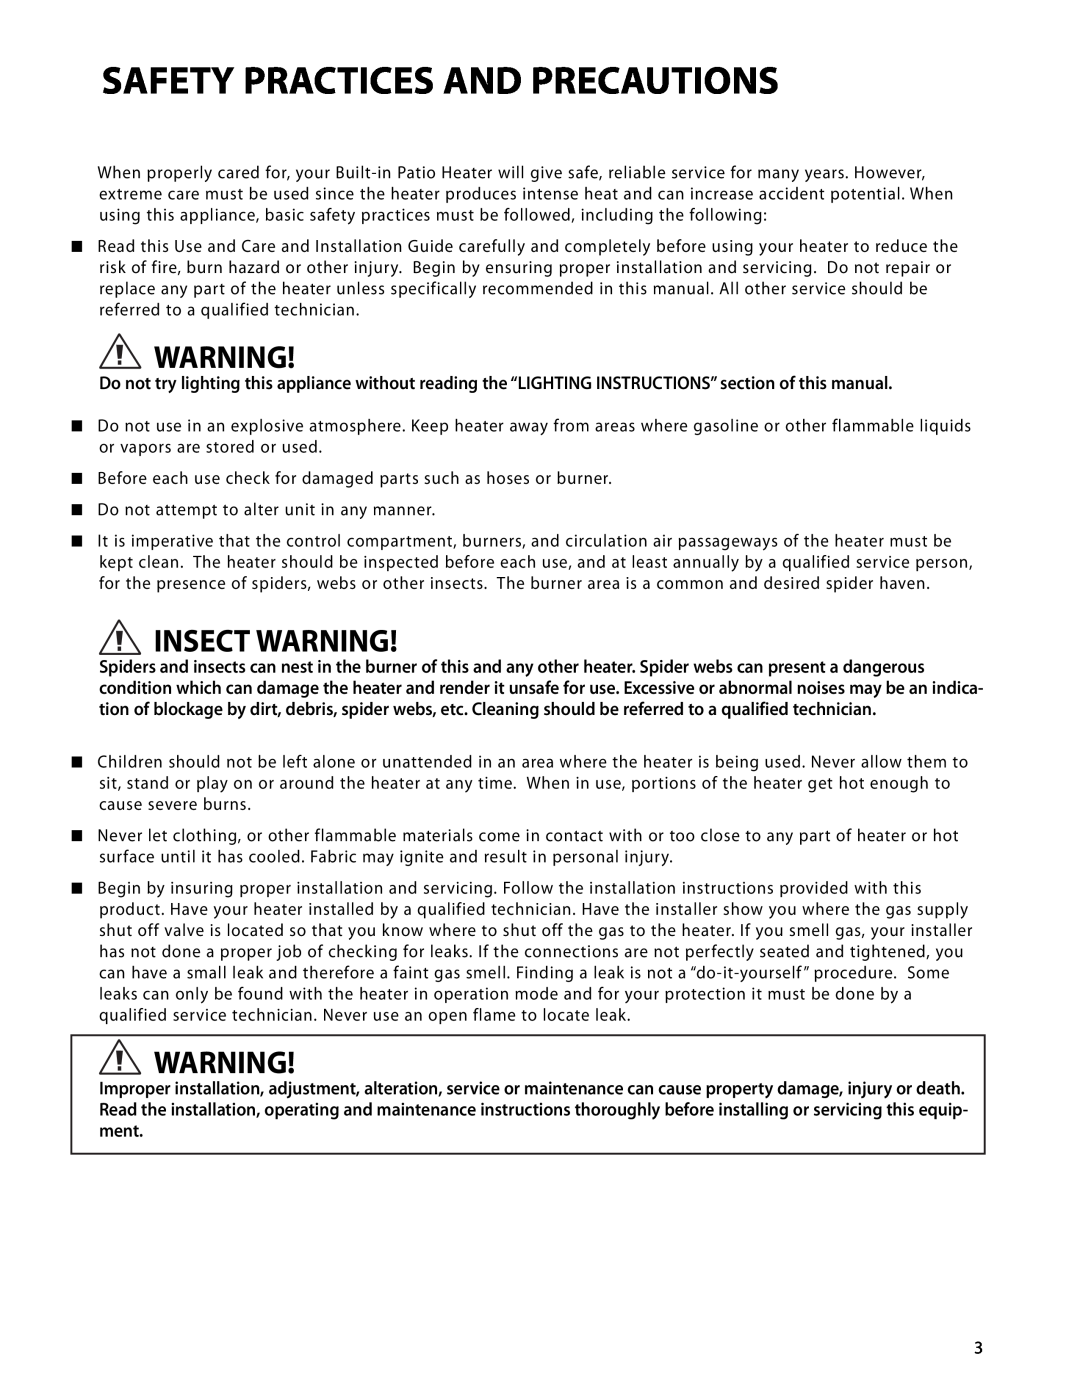 DCS DRH-48N manual Safety Practices And Precautions, Insect Warning 